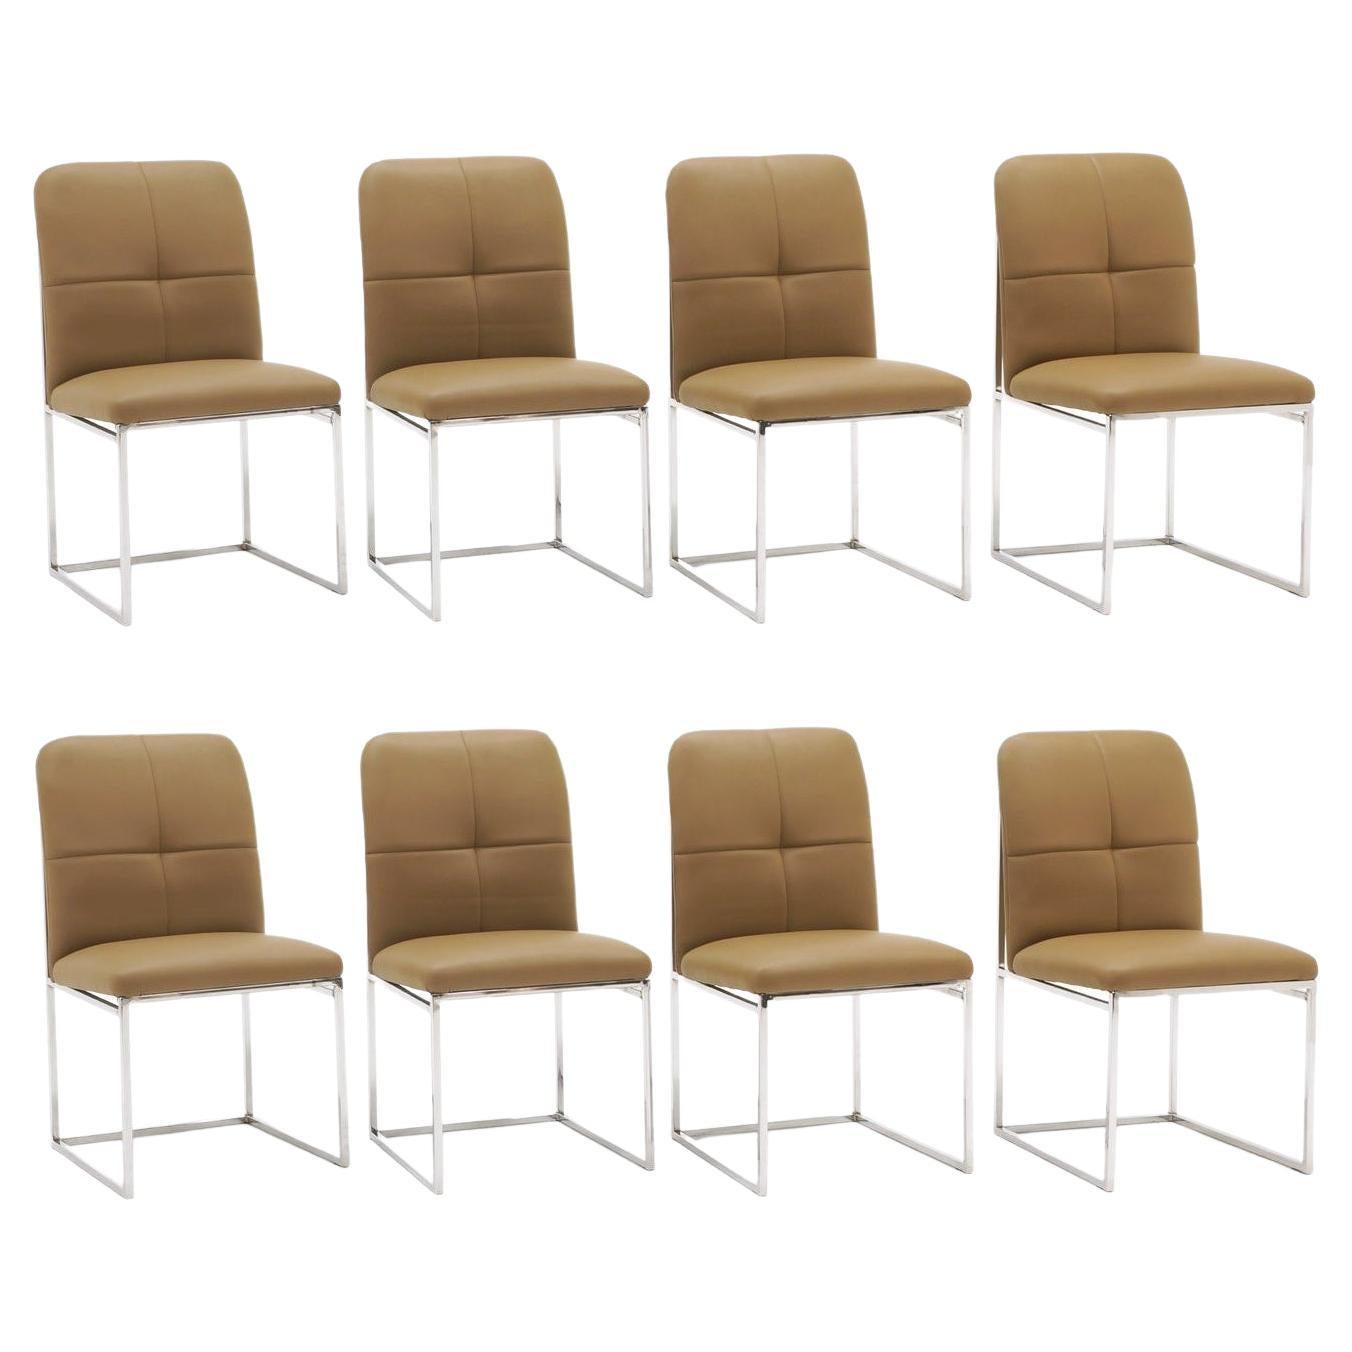 Set of Eight Cal-Style Tan Colored Dining Chairs